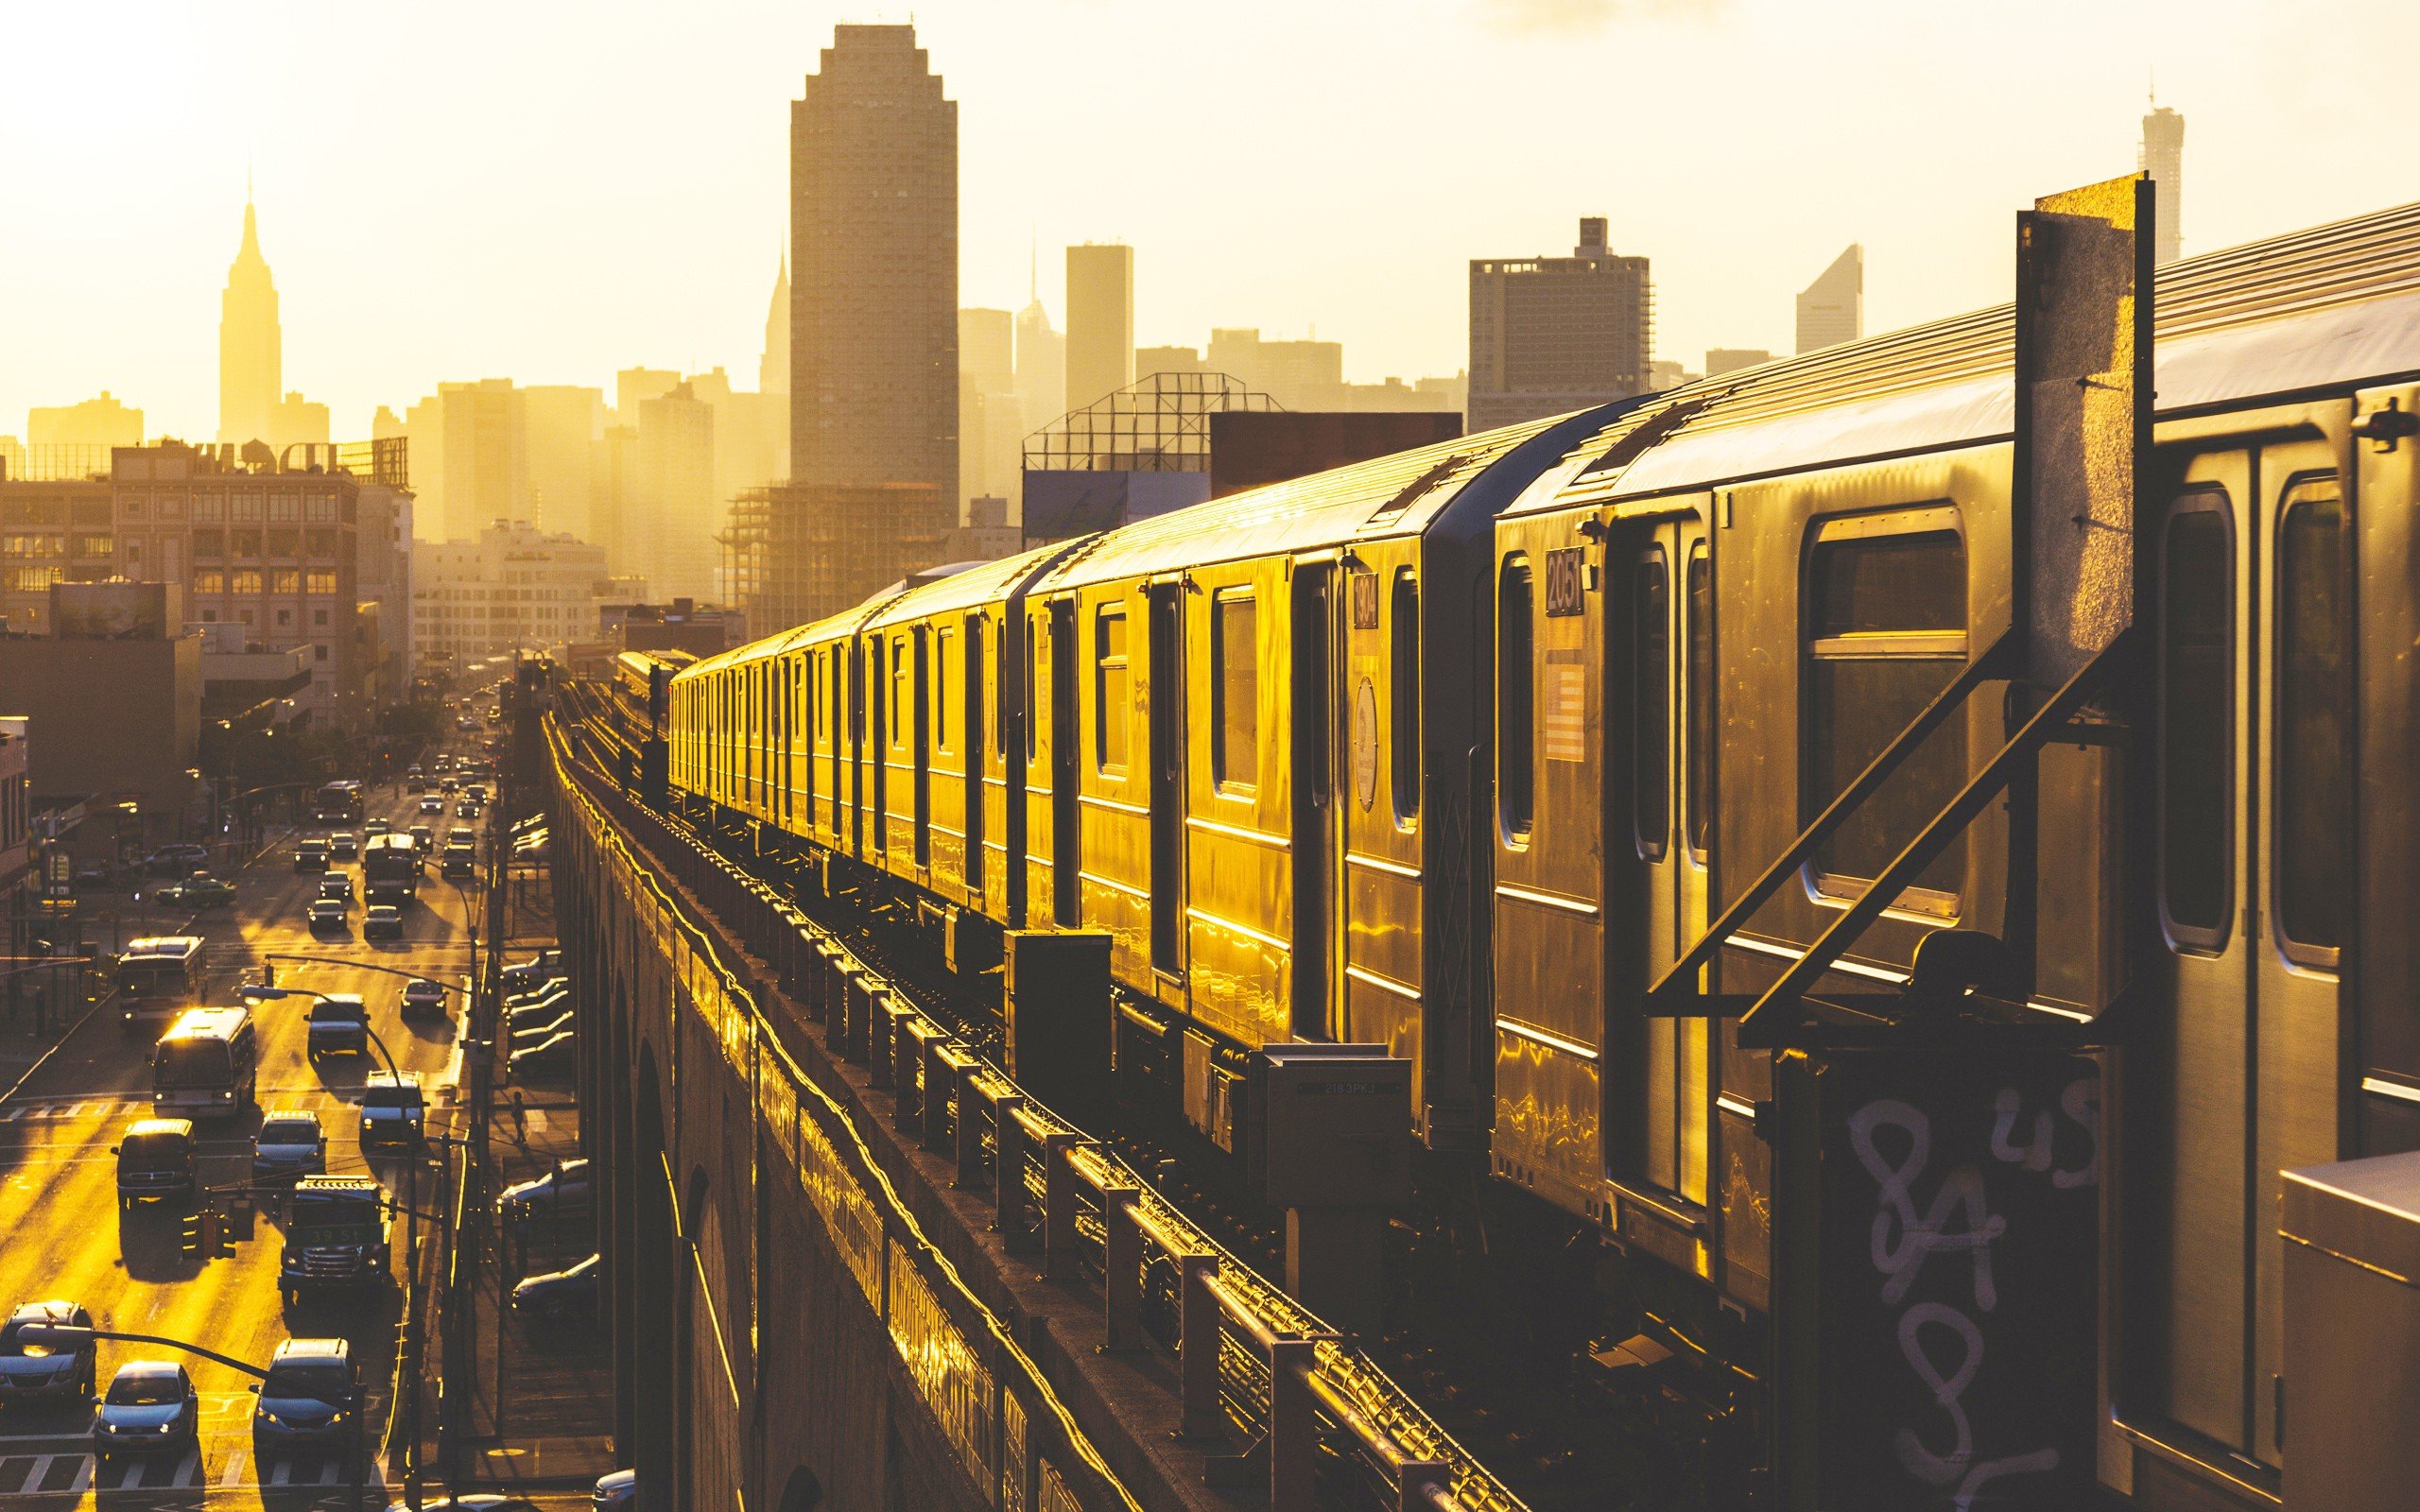 Wallpapers New York train landscapes on the desktop